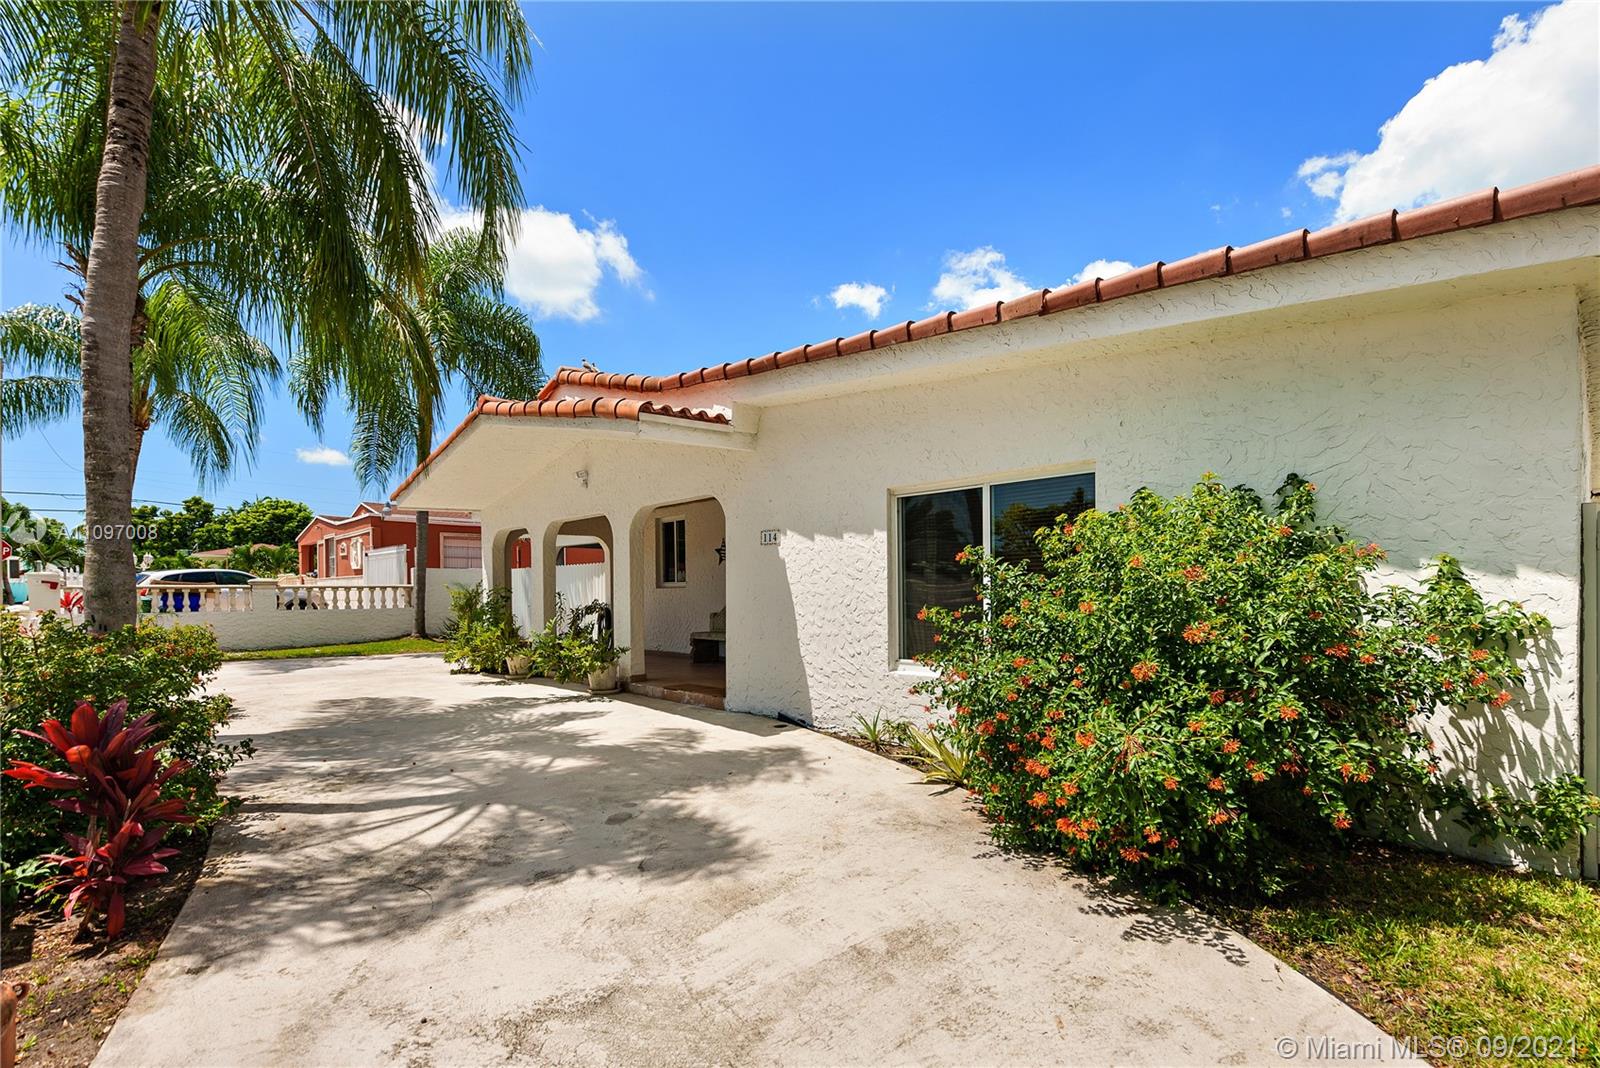 Photo 1 of 114 57th Ct in Miami - MLS A11097008